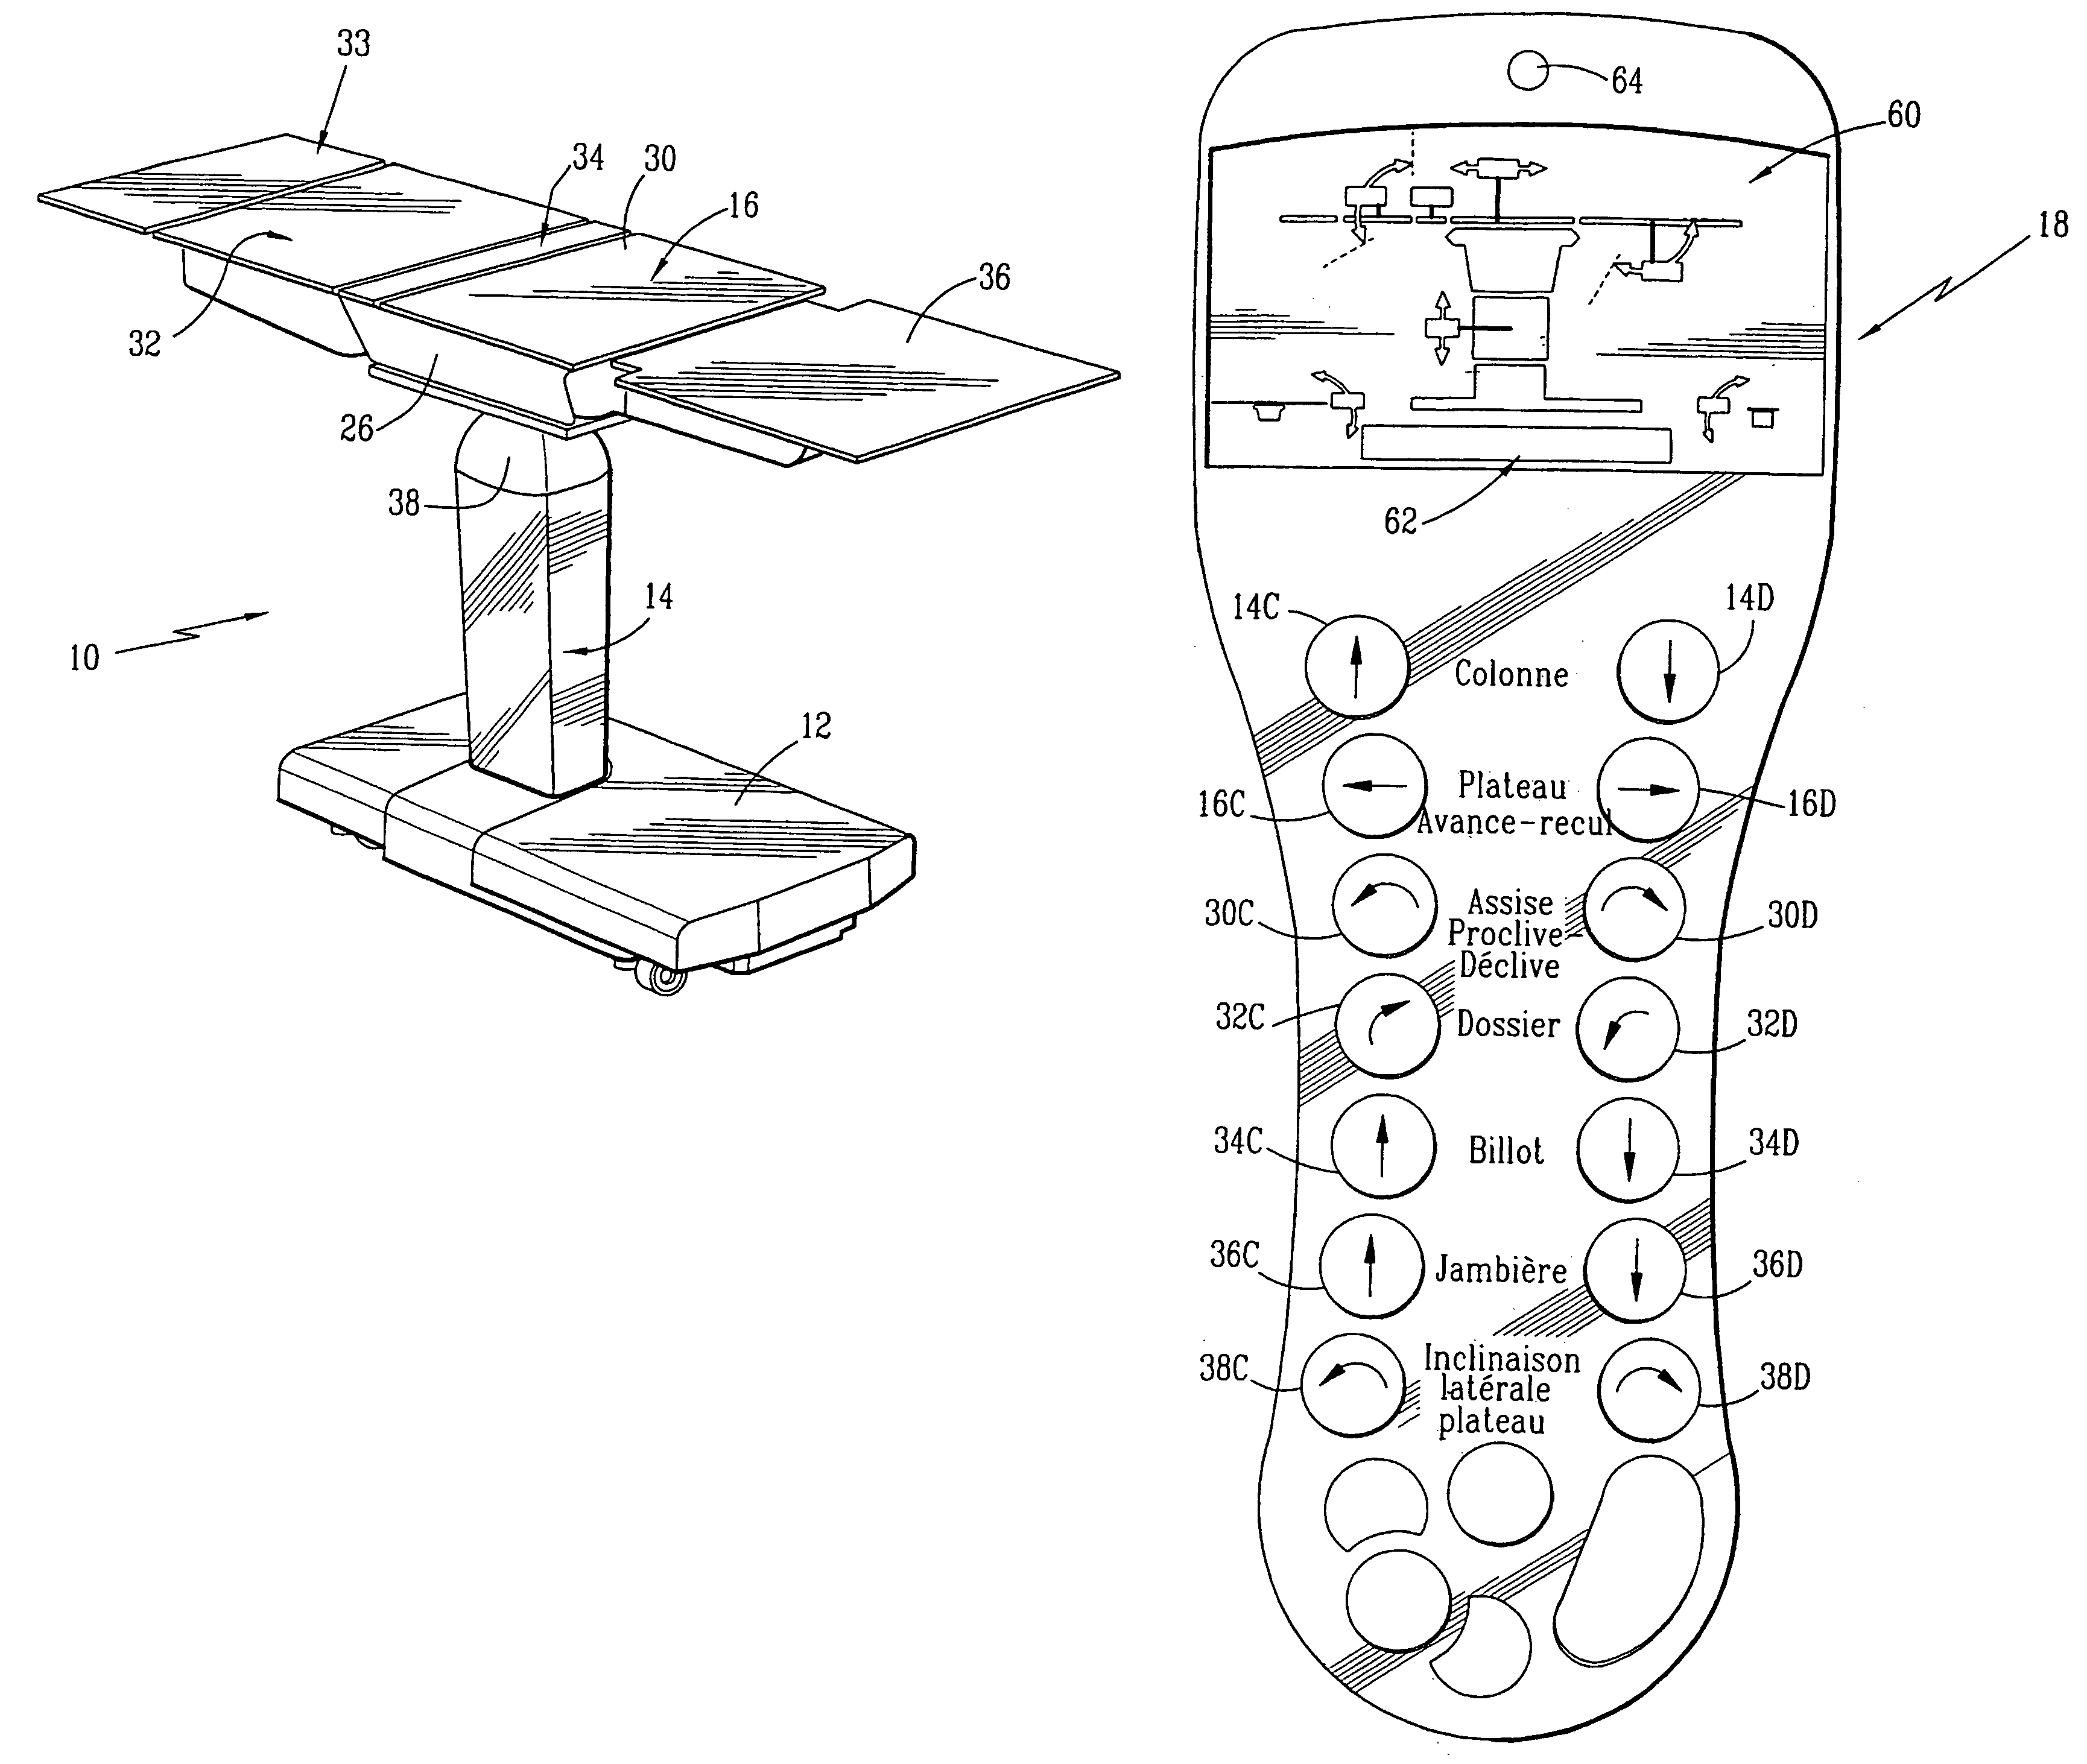 Motorized operating table with multiple sections